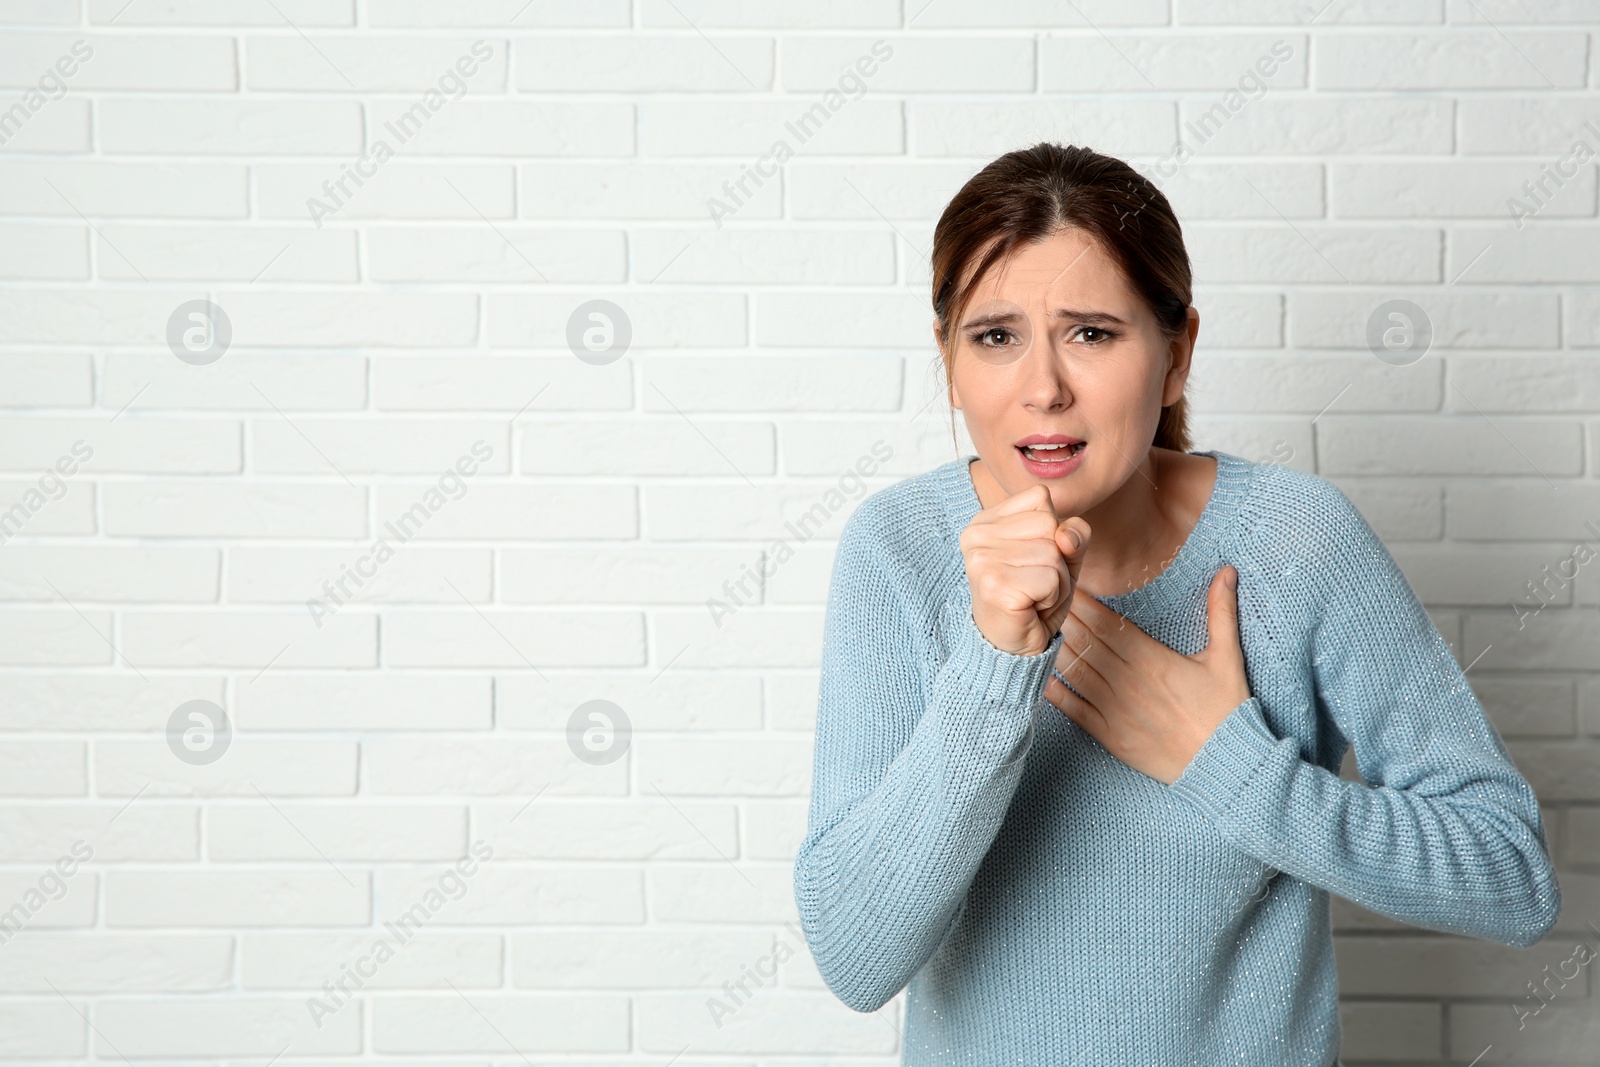 Photo of Woman suffering from cough near brick wall. Space for text